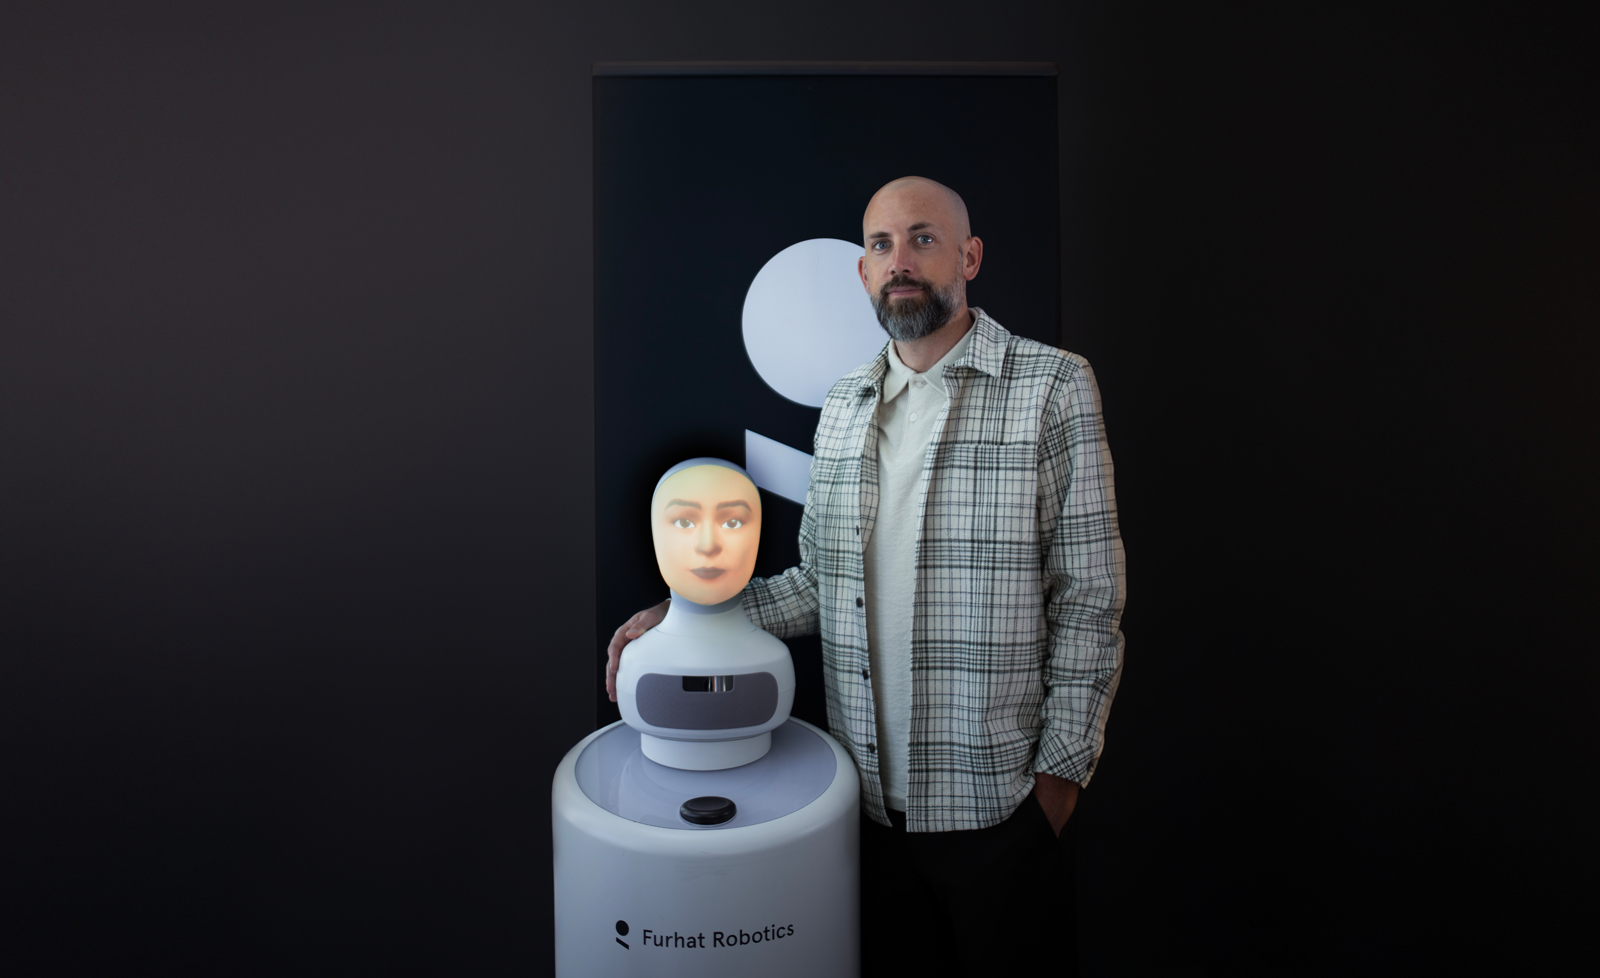 Furhat Robotics expands global presence with new office in the Middle East